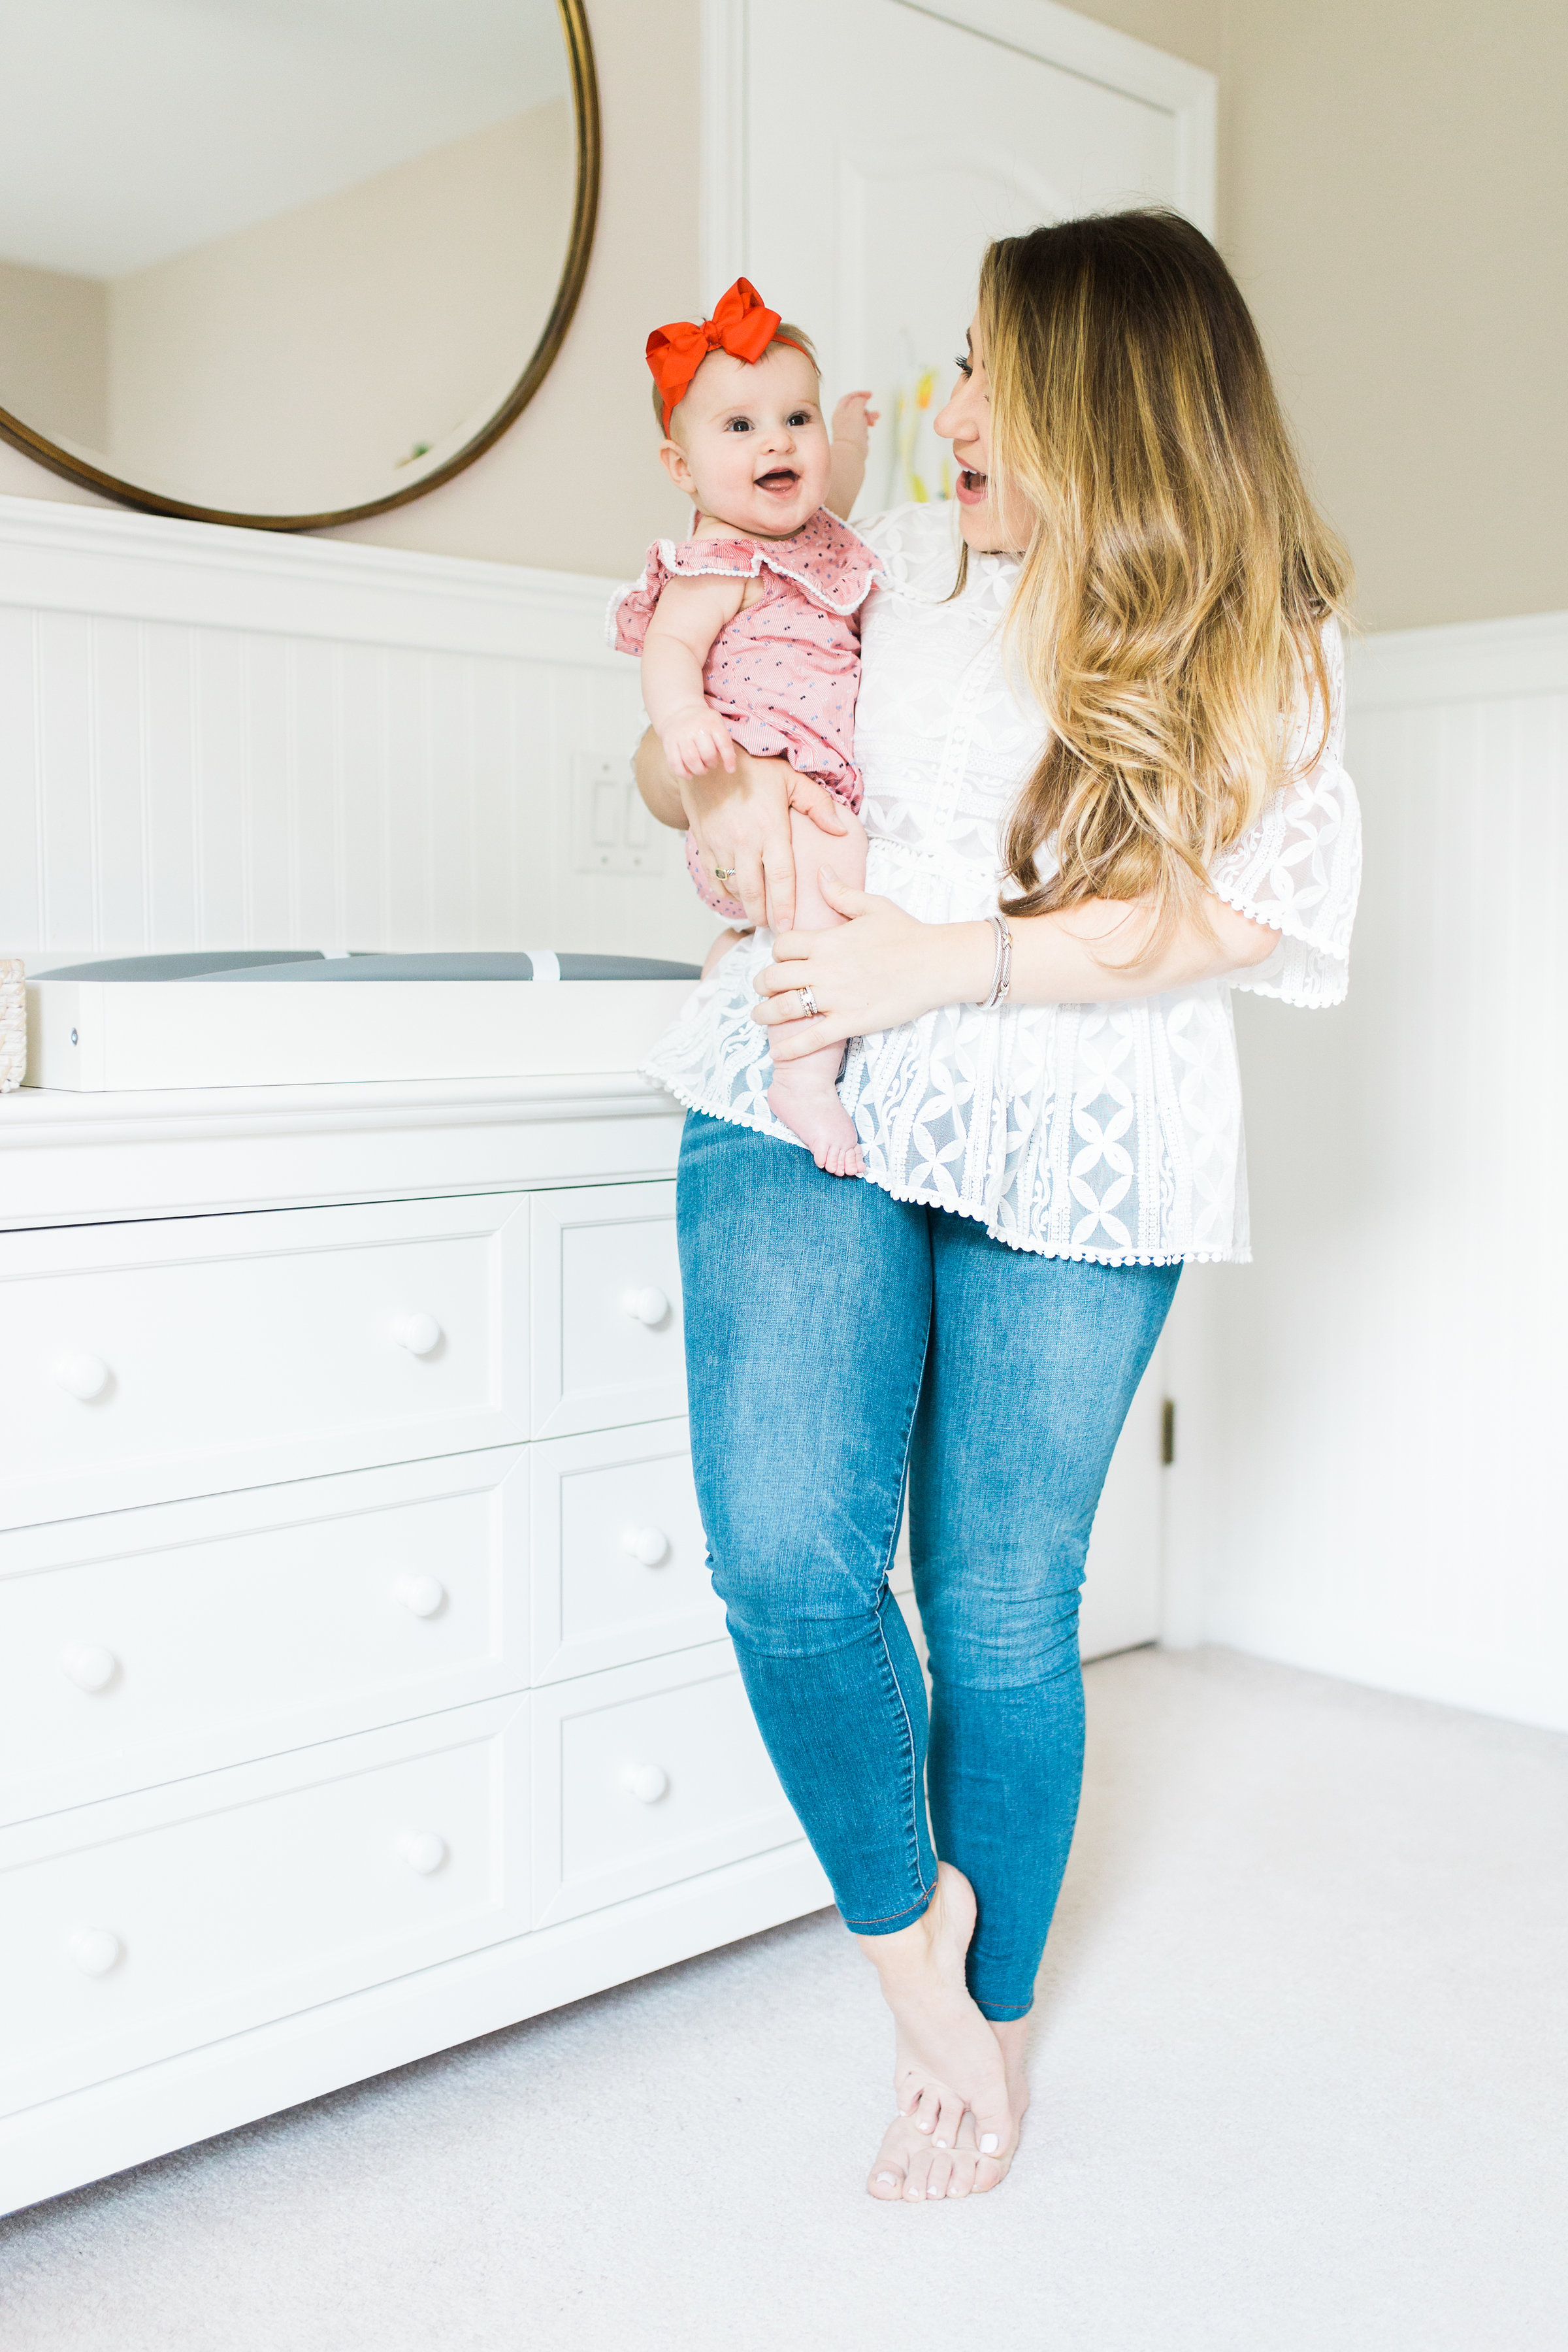 Nursery Update: Baby Relax Crib featured by popular North Carolina lifestyle blogger, Coffee Beans and Bobby Pins